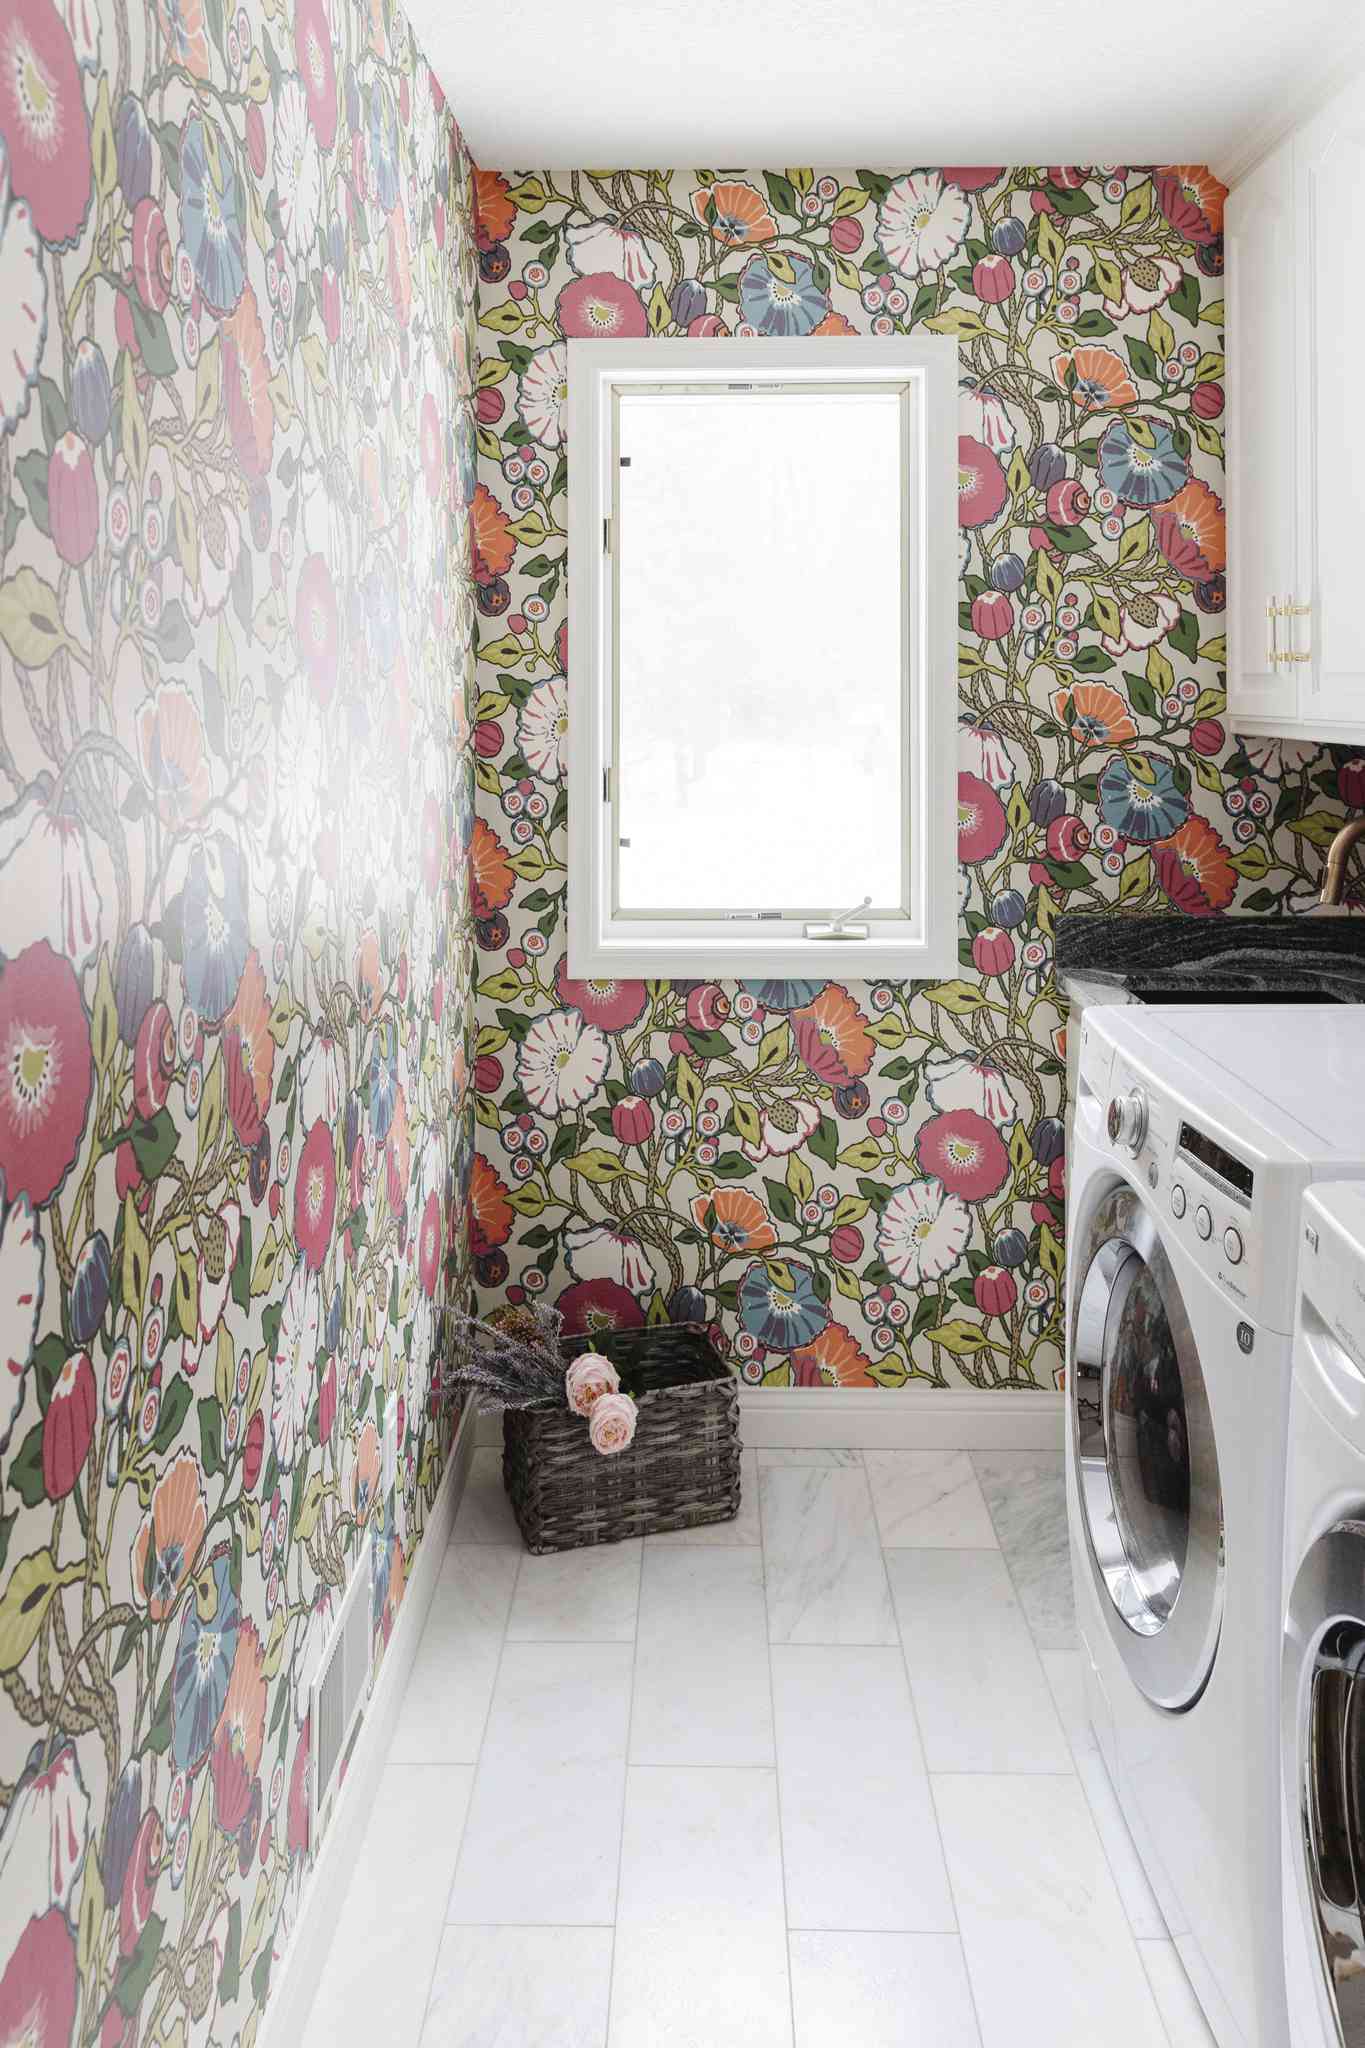 Small laundry room ideas with big style